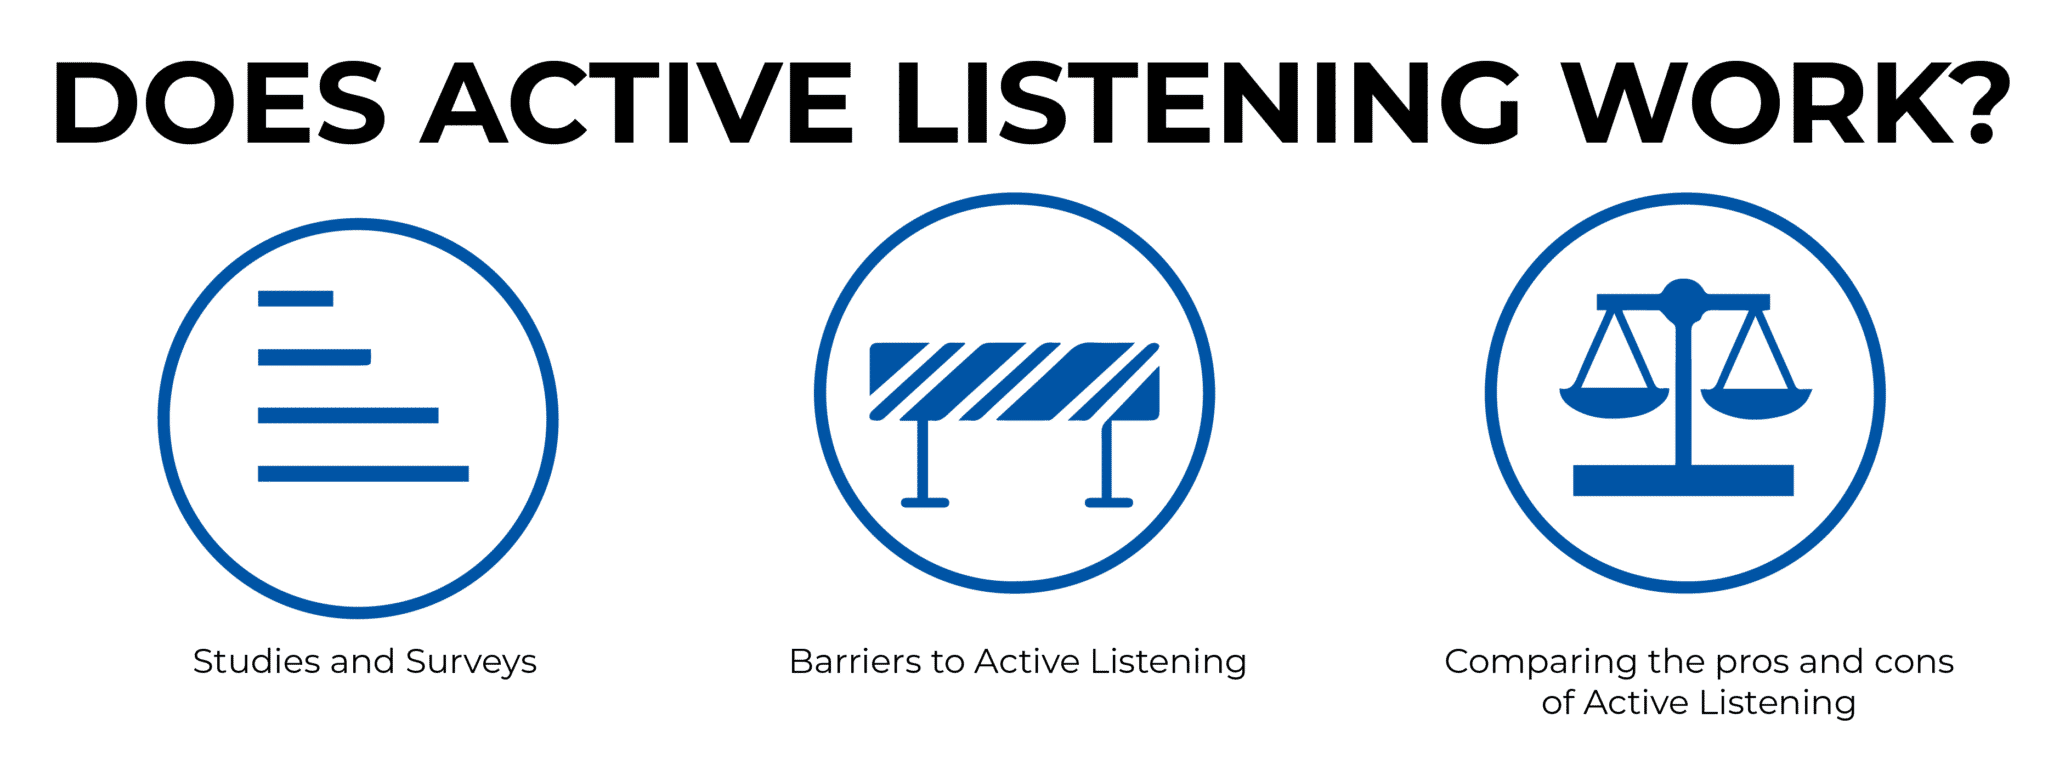 DOES ACTIVE LISTENING WORK ?